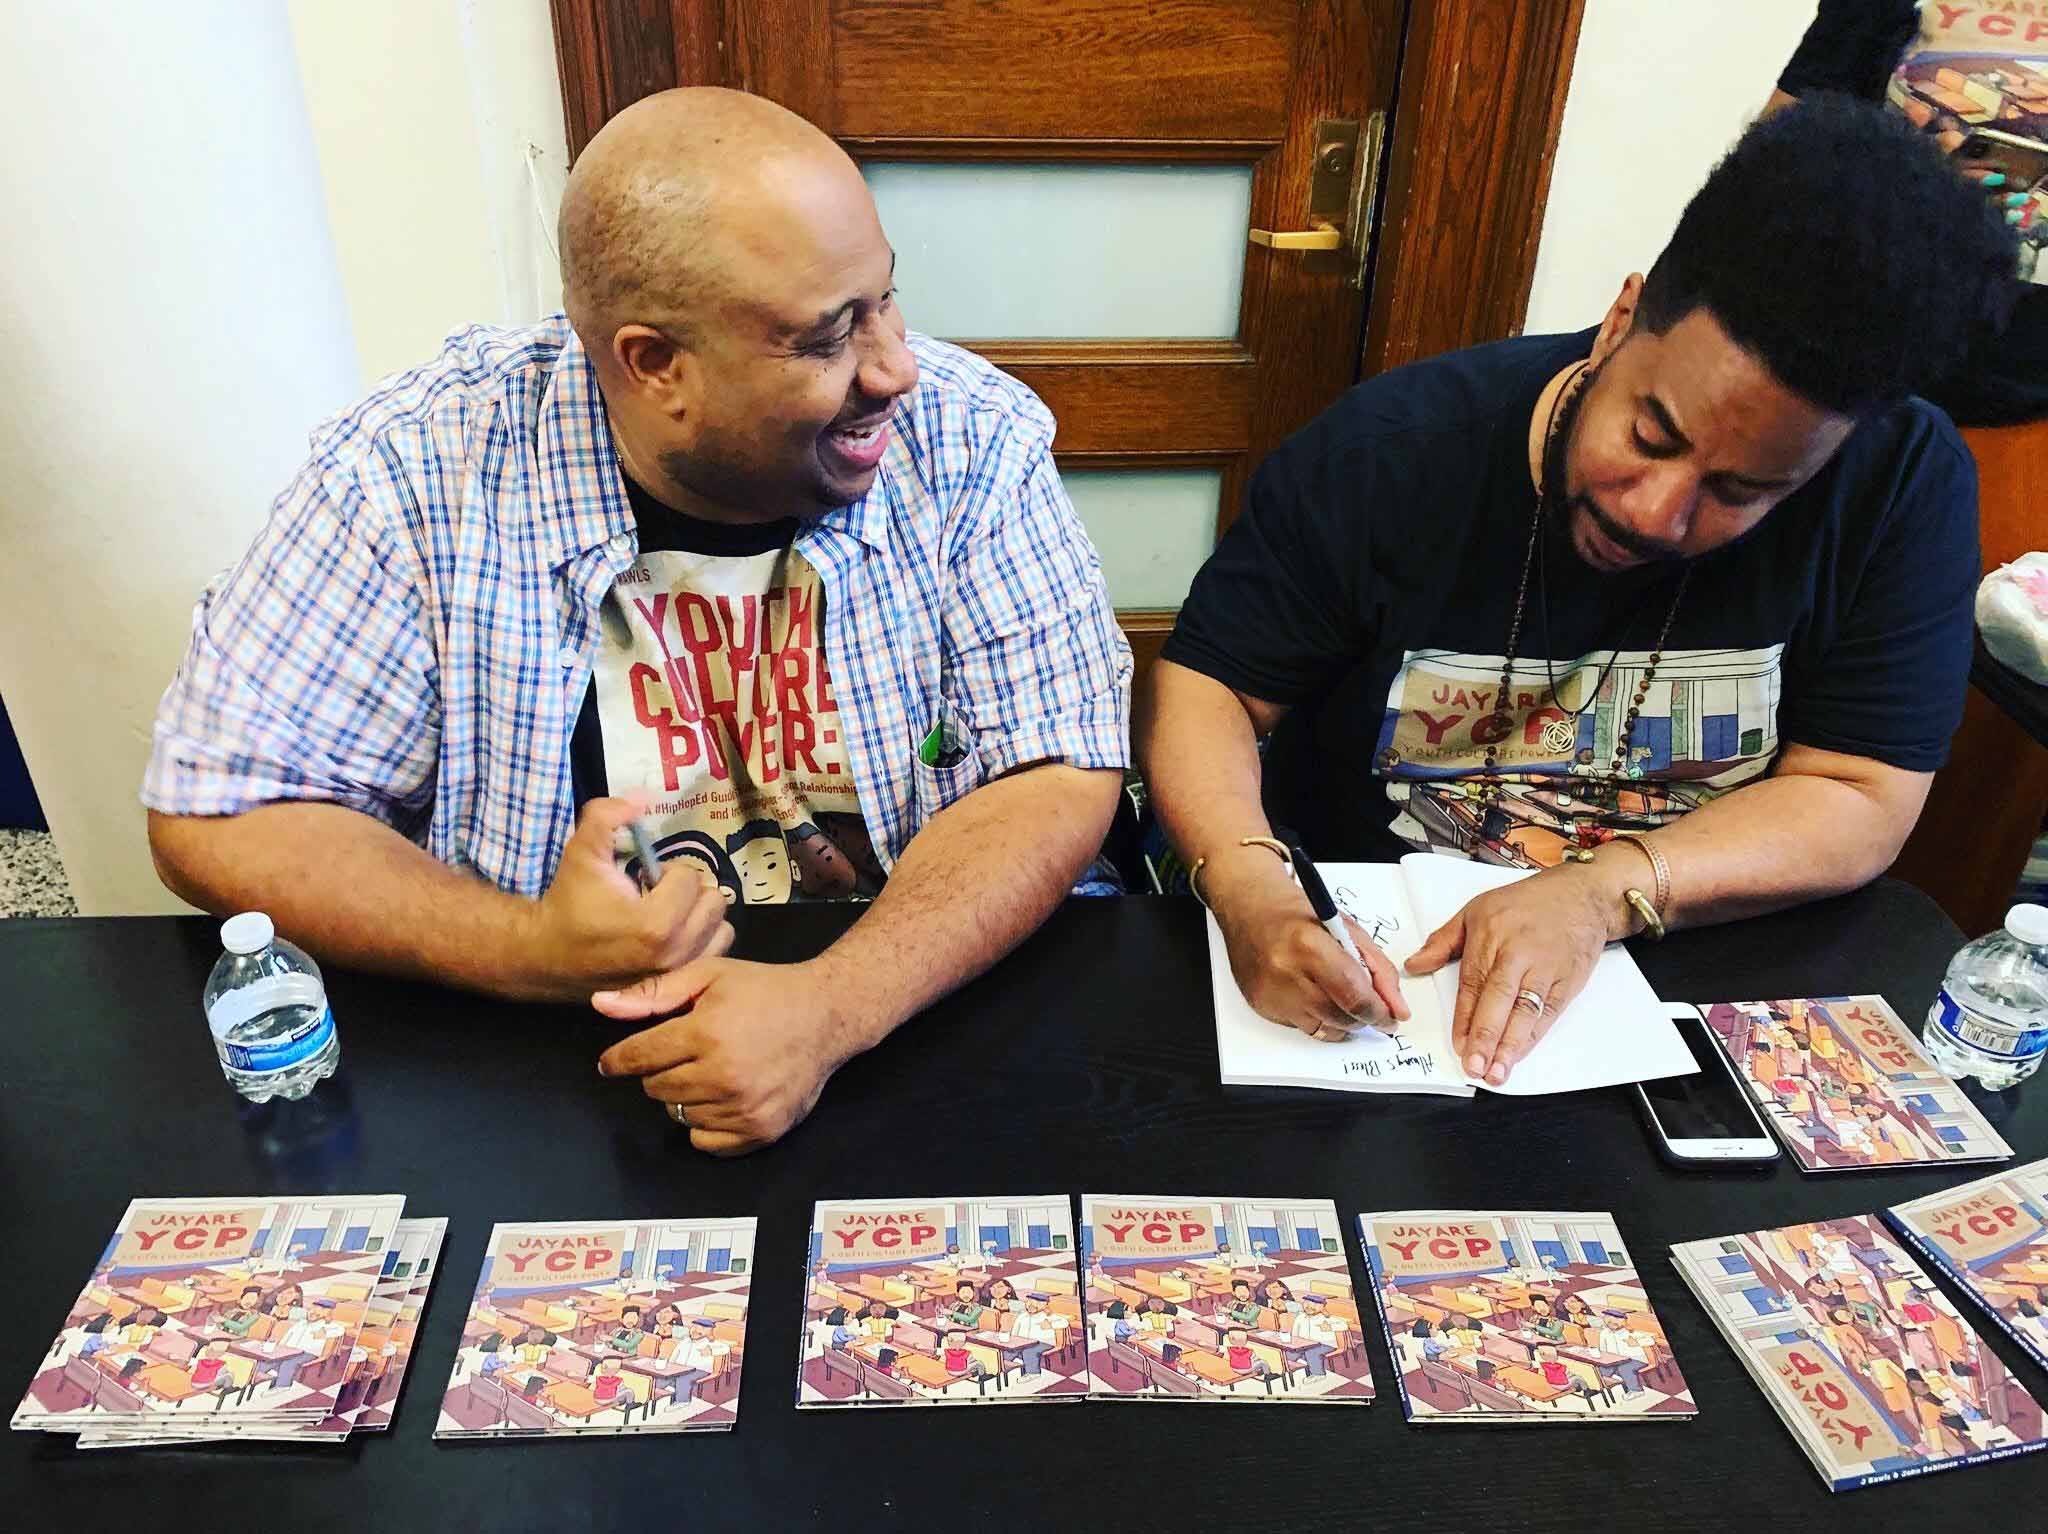 Dr. Jason Rawls and co-author John Robinson autograph copies of their book, Youth Culture Power: A #HipHopEd Guide to Building Teacher-Student Relationships and Increasing Student Engagement. Photo courtesy of Dr. Rawls